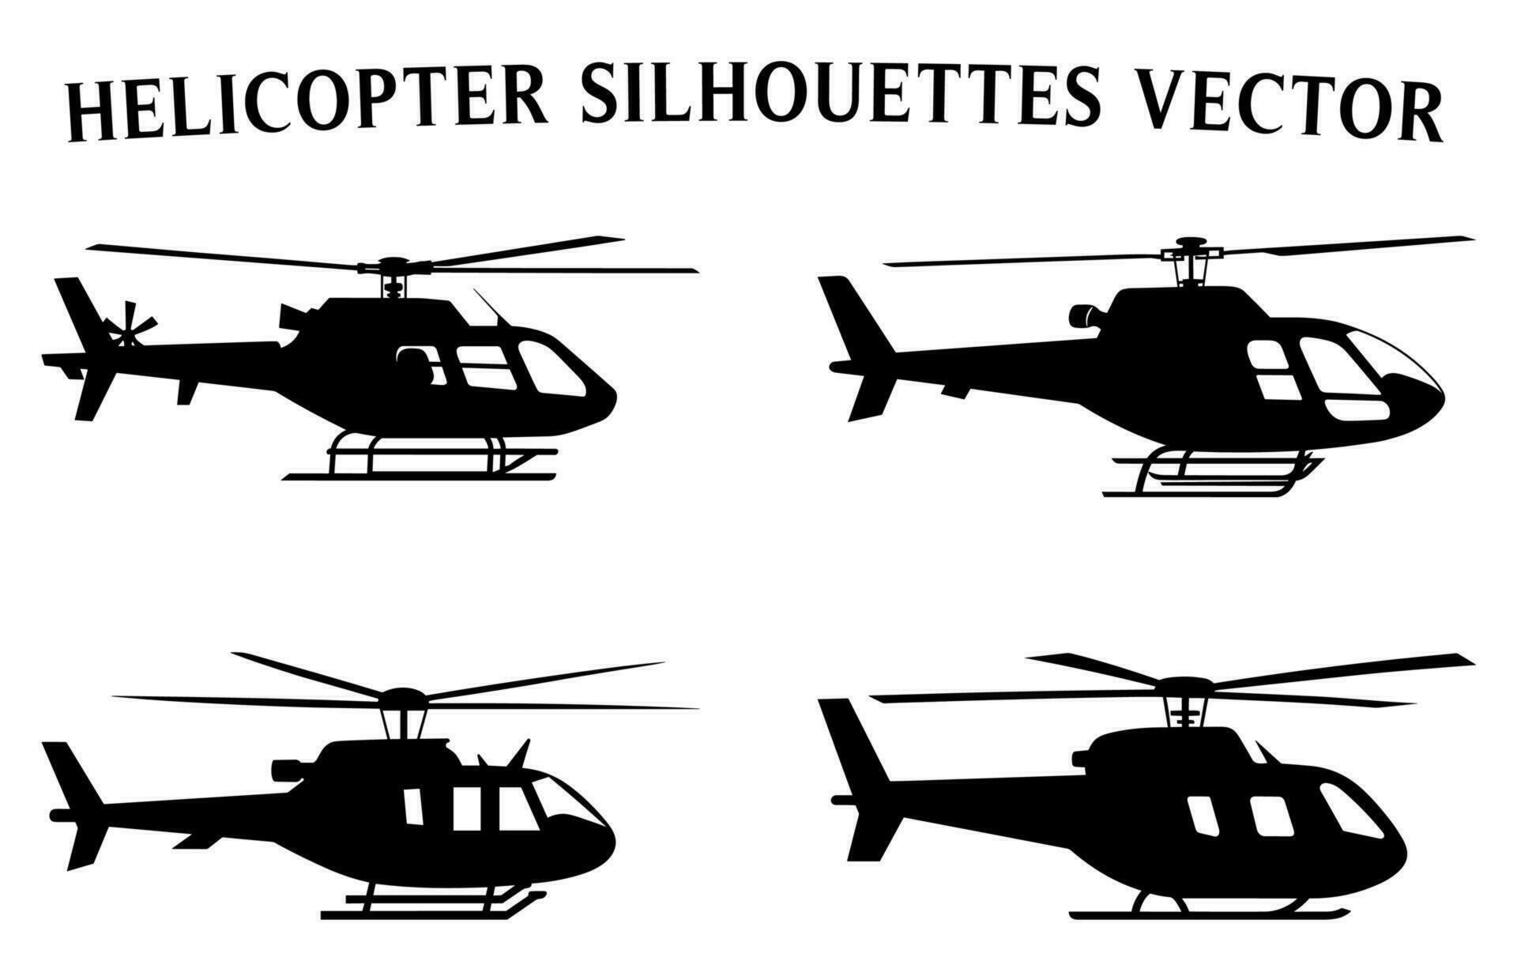 Helicopter Silhouettes Clipart Bundle, Different Types of Military Helicopters Vector Set